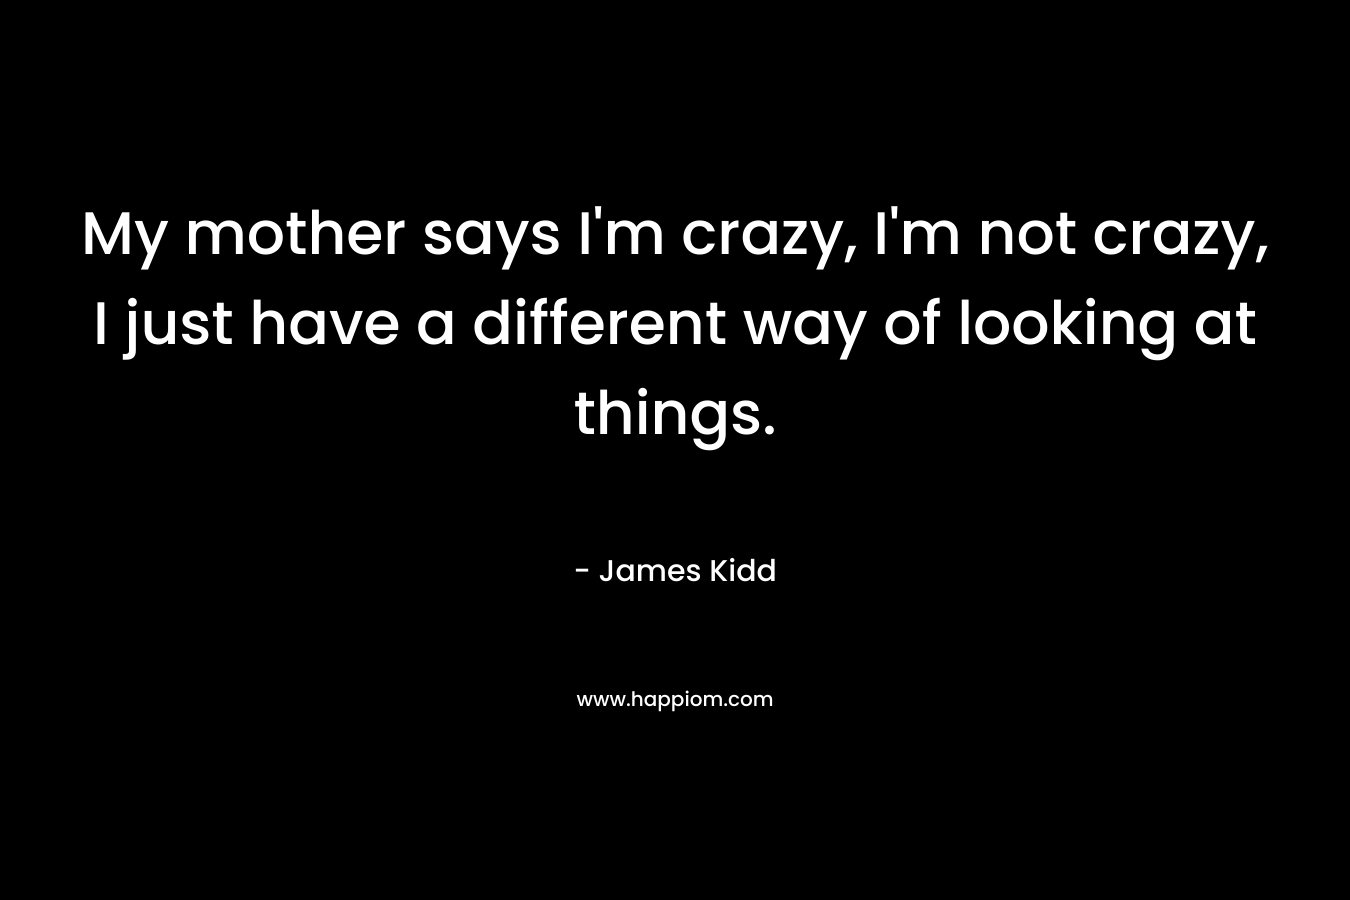 My mother says I'm crazy, I'm not crazy, I just have a different way of looking at things.